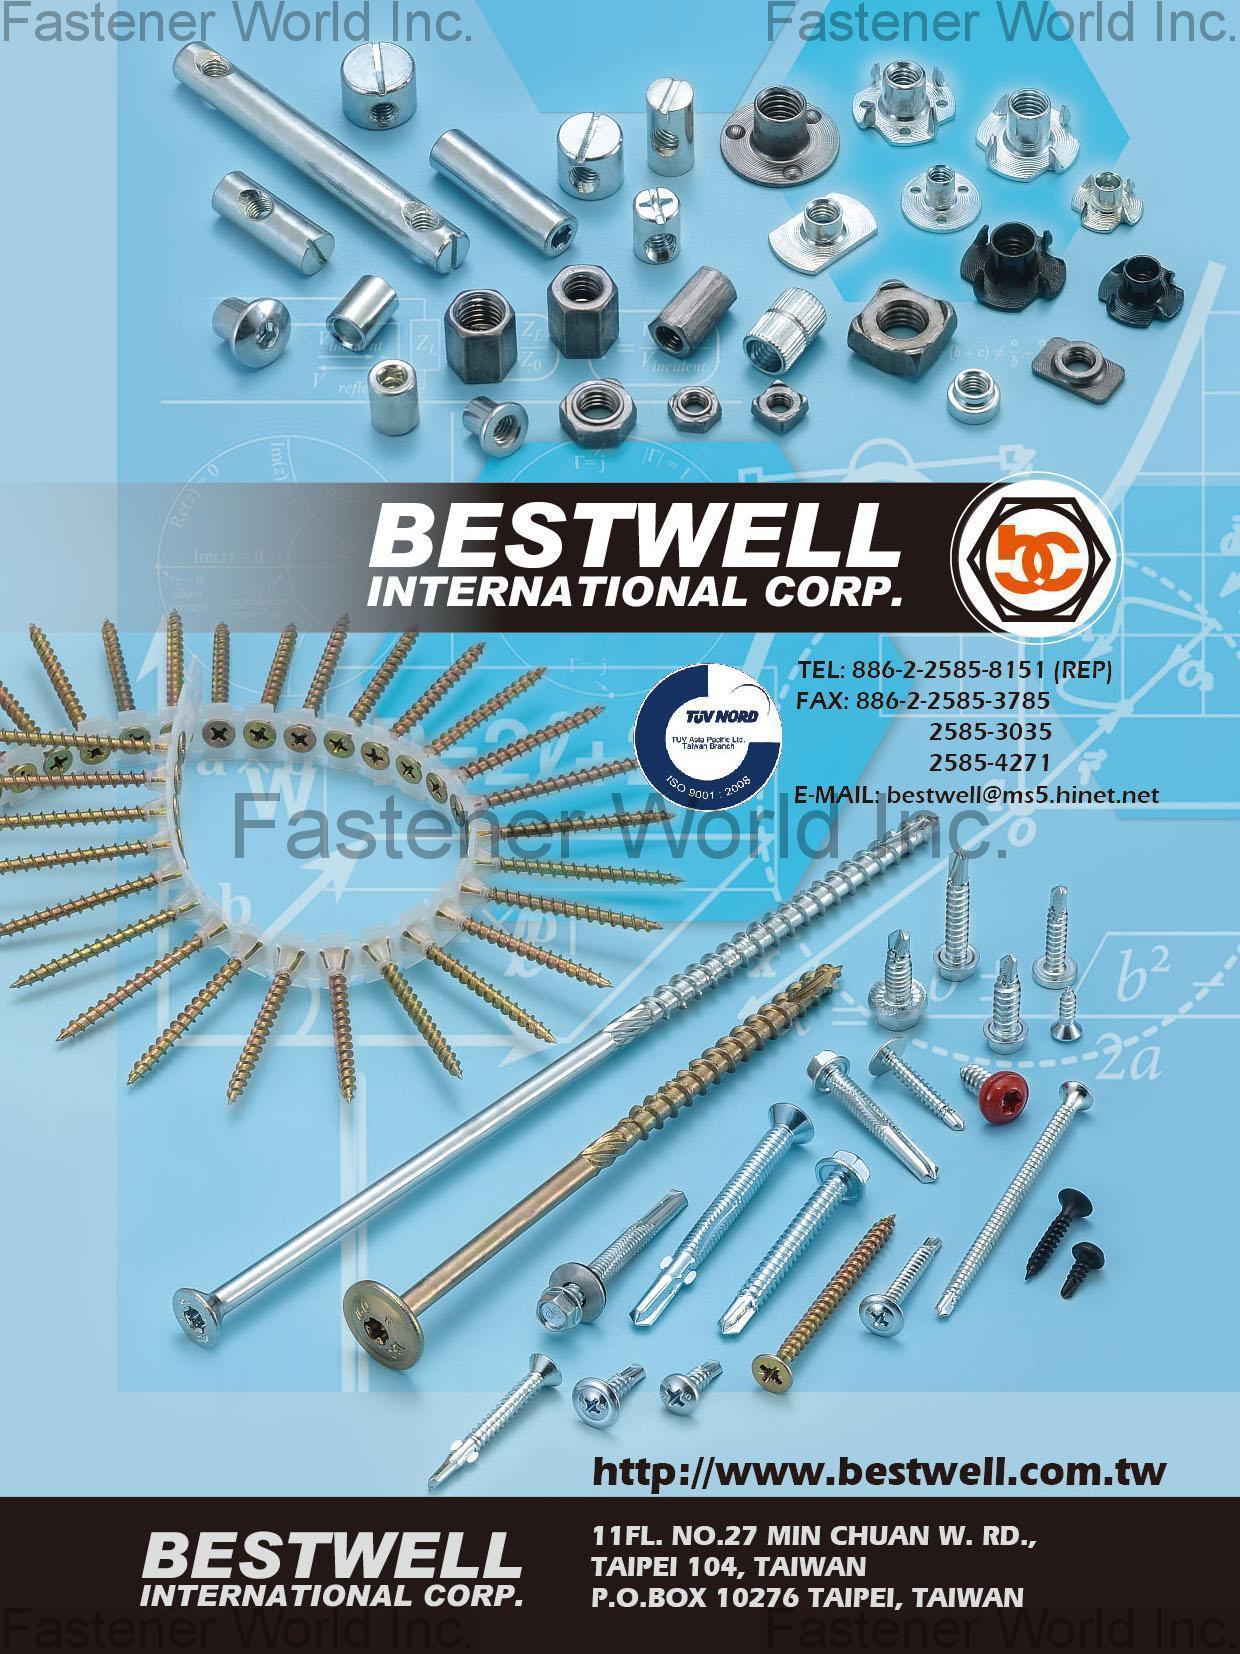 BESTWELL INTERNATIONAL CORP.  , Chipboard ScrewsHEX BOLT, SQUARE BOLT, CARRIAGE BOLT, FLANGE BOLT, SOCKET HEAD CAP SCREW, SET SCREW, SHACKLE BOLT, CUP BOLT, ALL THREAD STUD, OVAL NECK, SQUARE NECK, GAS BOLT, T-HEAD BOLT, SINGLE END STUD, T/S & M/S, SELF DRILLING SCREW, DWS & CHIPBOARD SCREW, SCREW WITH BONDER WASHER, SECURITY SCREW, SEM SCREW, SEPCIAL SERRATION SCREW, NUT, LOCK NUT, TEFLON COATING NUT, NON-STANDARD & OTHERS, FLAT WASHER, LOCK WASHER, SQUARE WASHER, SOLID WASHER, ANCHOR, STAMPING, SPECIAL FASTENERS, D-RING & RINGS, CNC ITEMS, WIRE MESH, BUTT SEAM SPACER, PLASTIC OR RUBBER PARTS, POWDER METALLURGY, SPRING & CL , Chipboard Screws